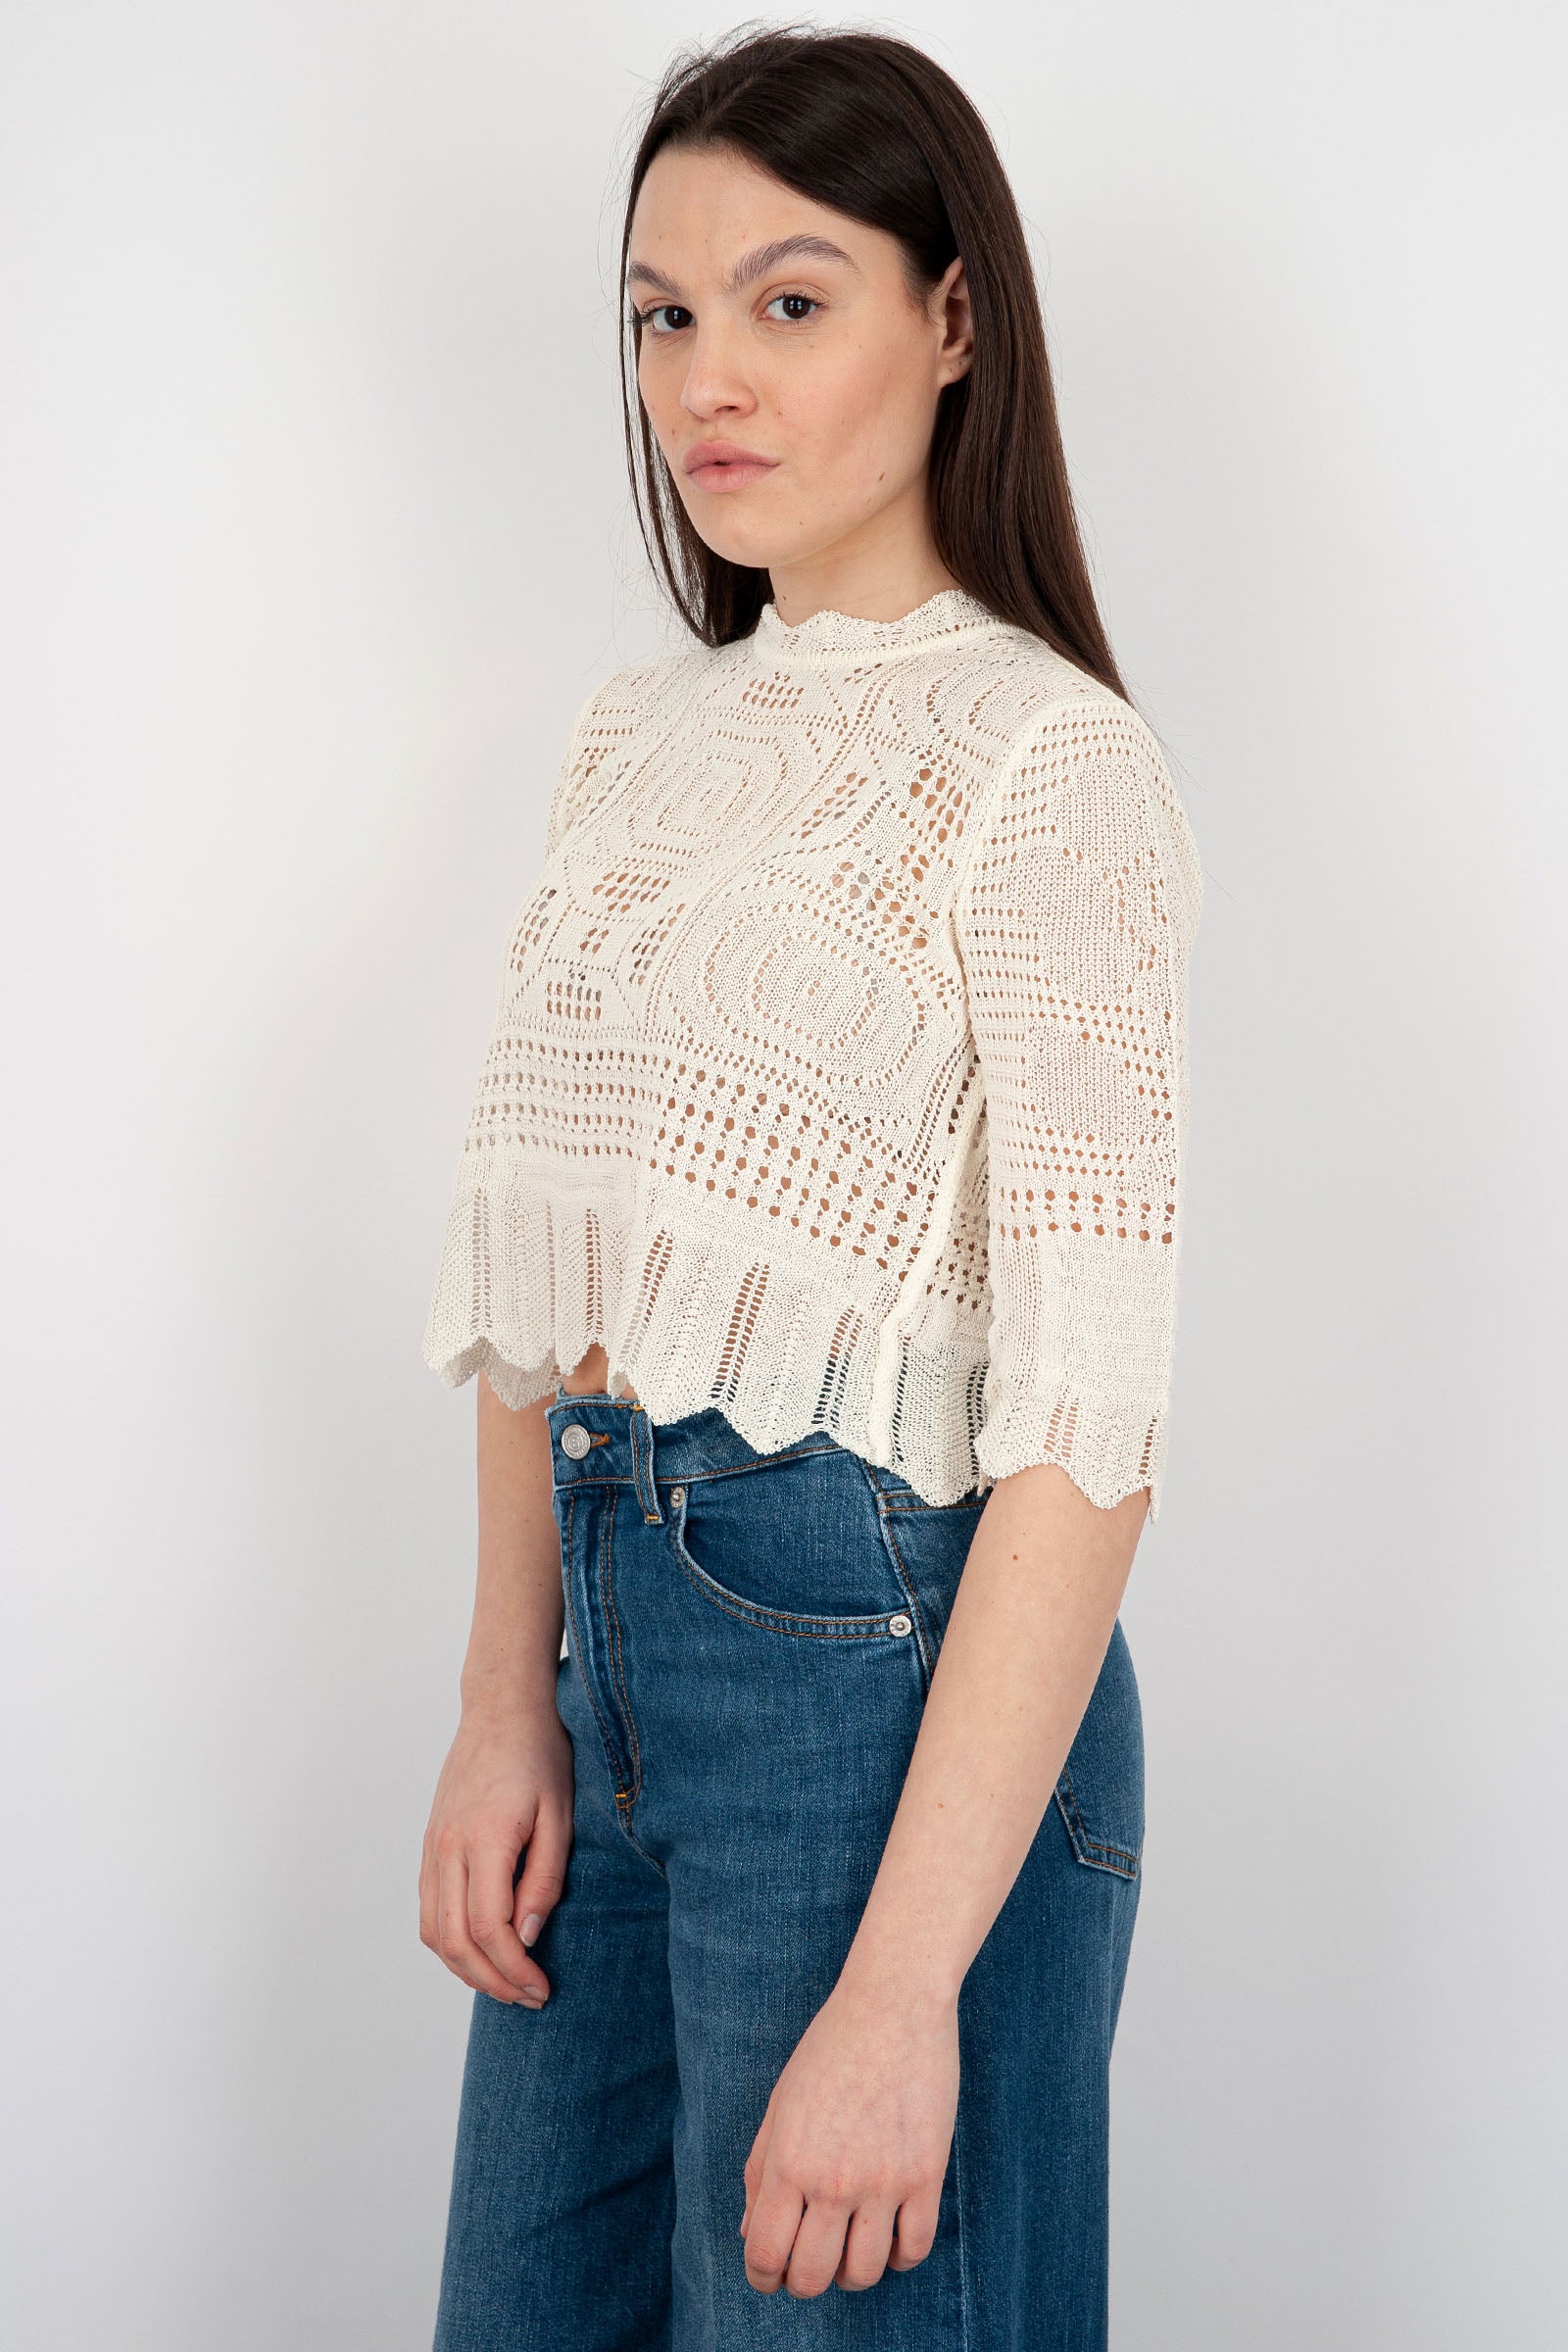 SemiCouture Grace Cotton Ivory Sweater - 3